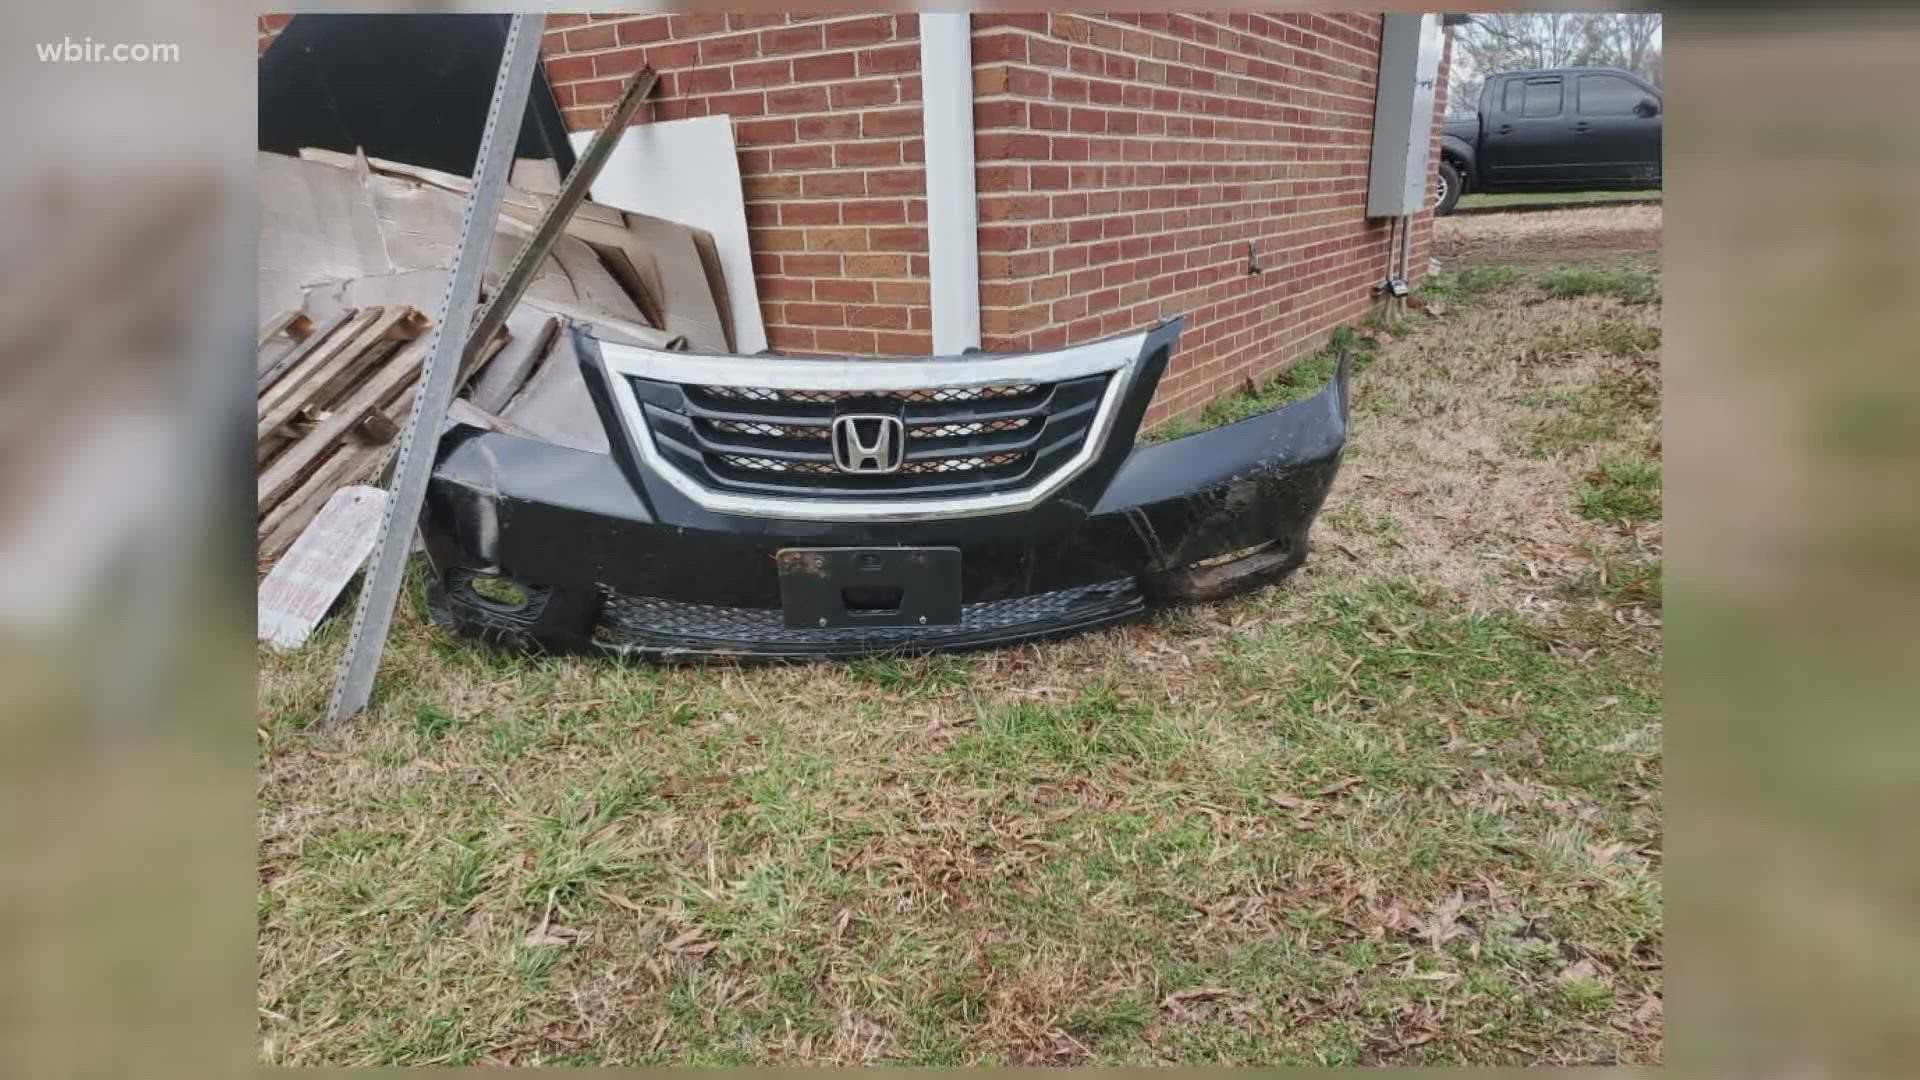 Officials said a car drove through the lawn at Lakeshore Park, hitting several light fixtures and leaving behind a car bumper.